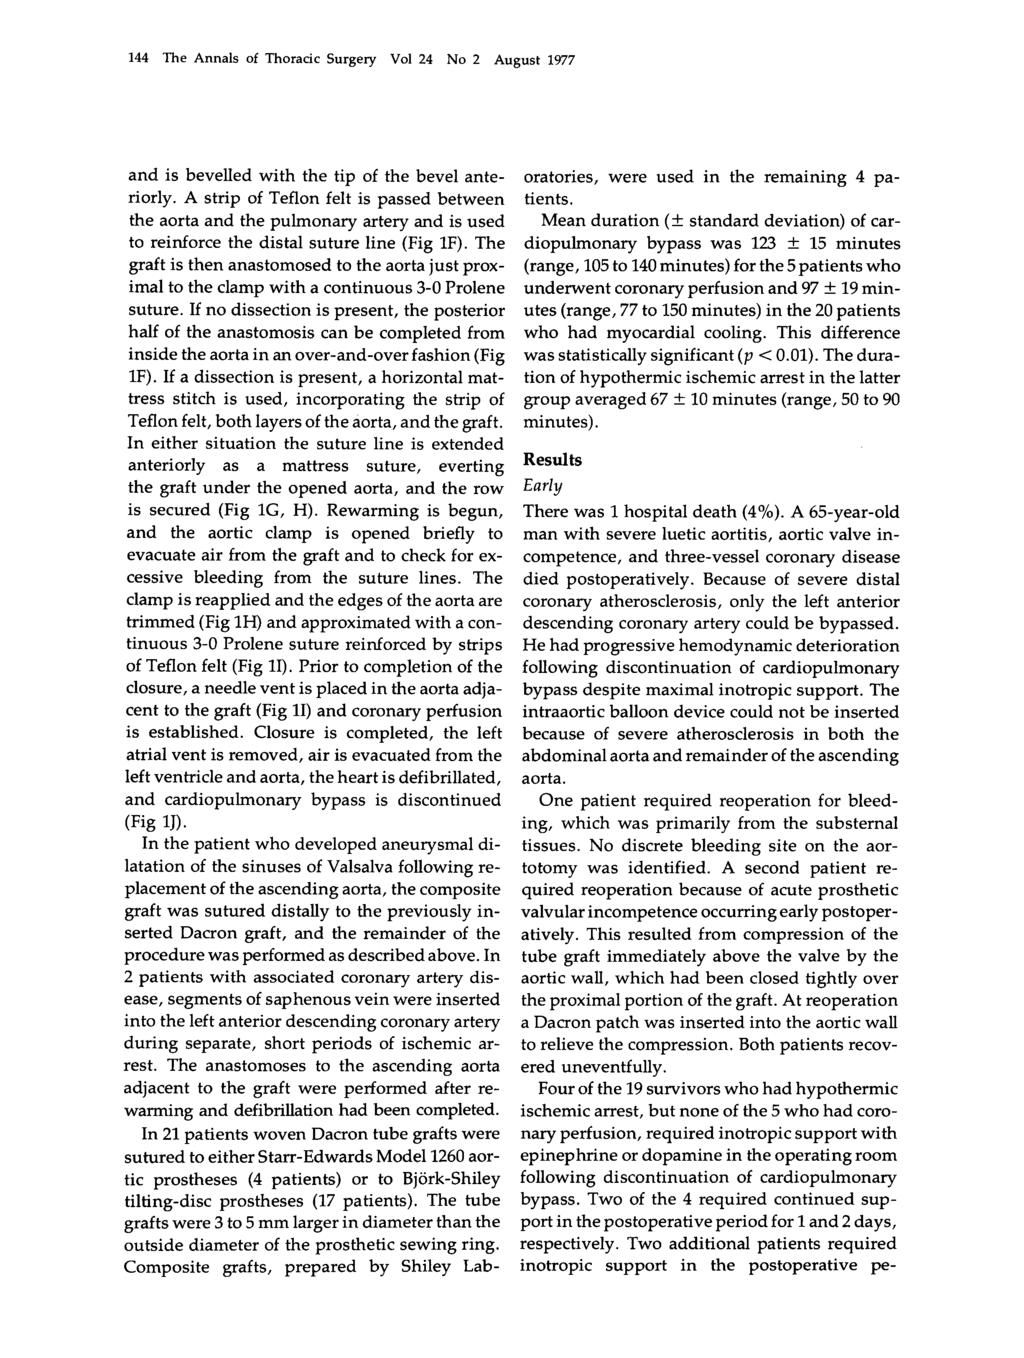 144 The Annals of Thoracic Surgery Vol 24 No 2 August 1977 and is bevelled with the tip of the bevel anteriorly.